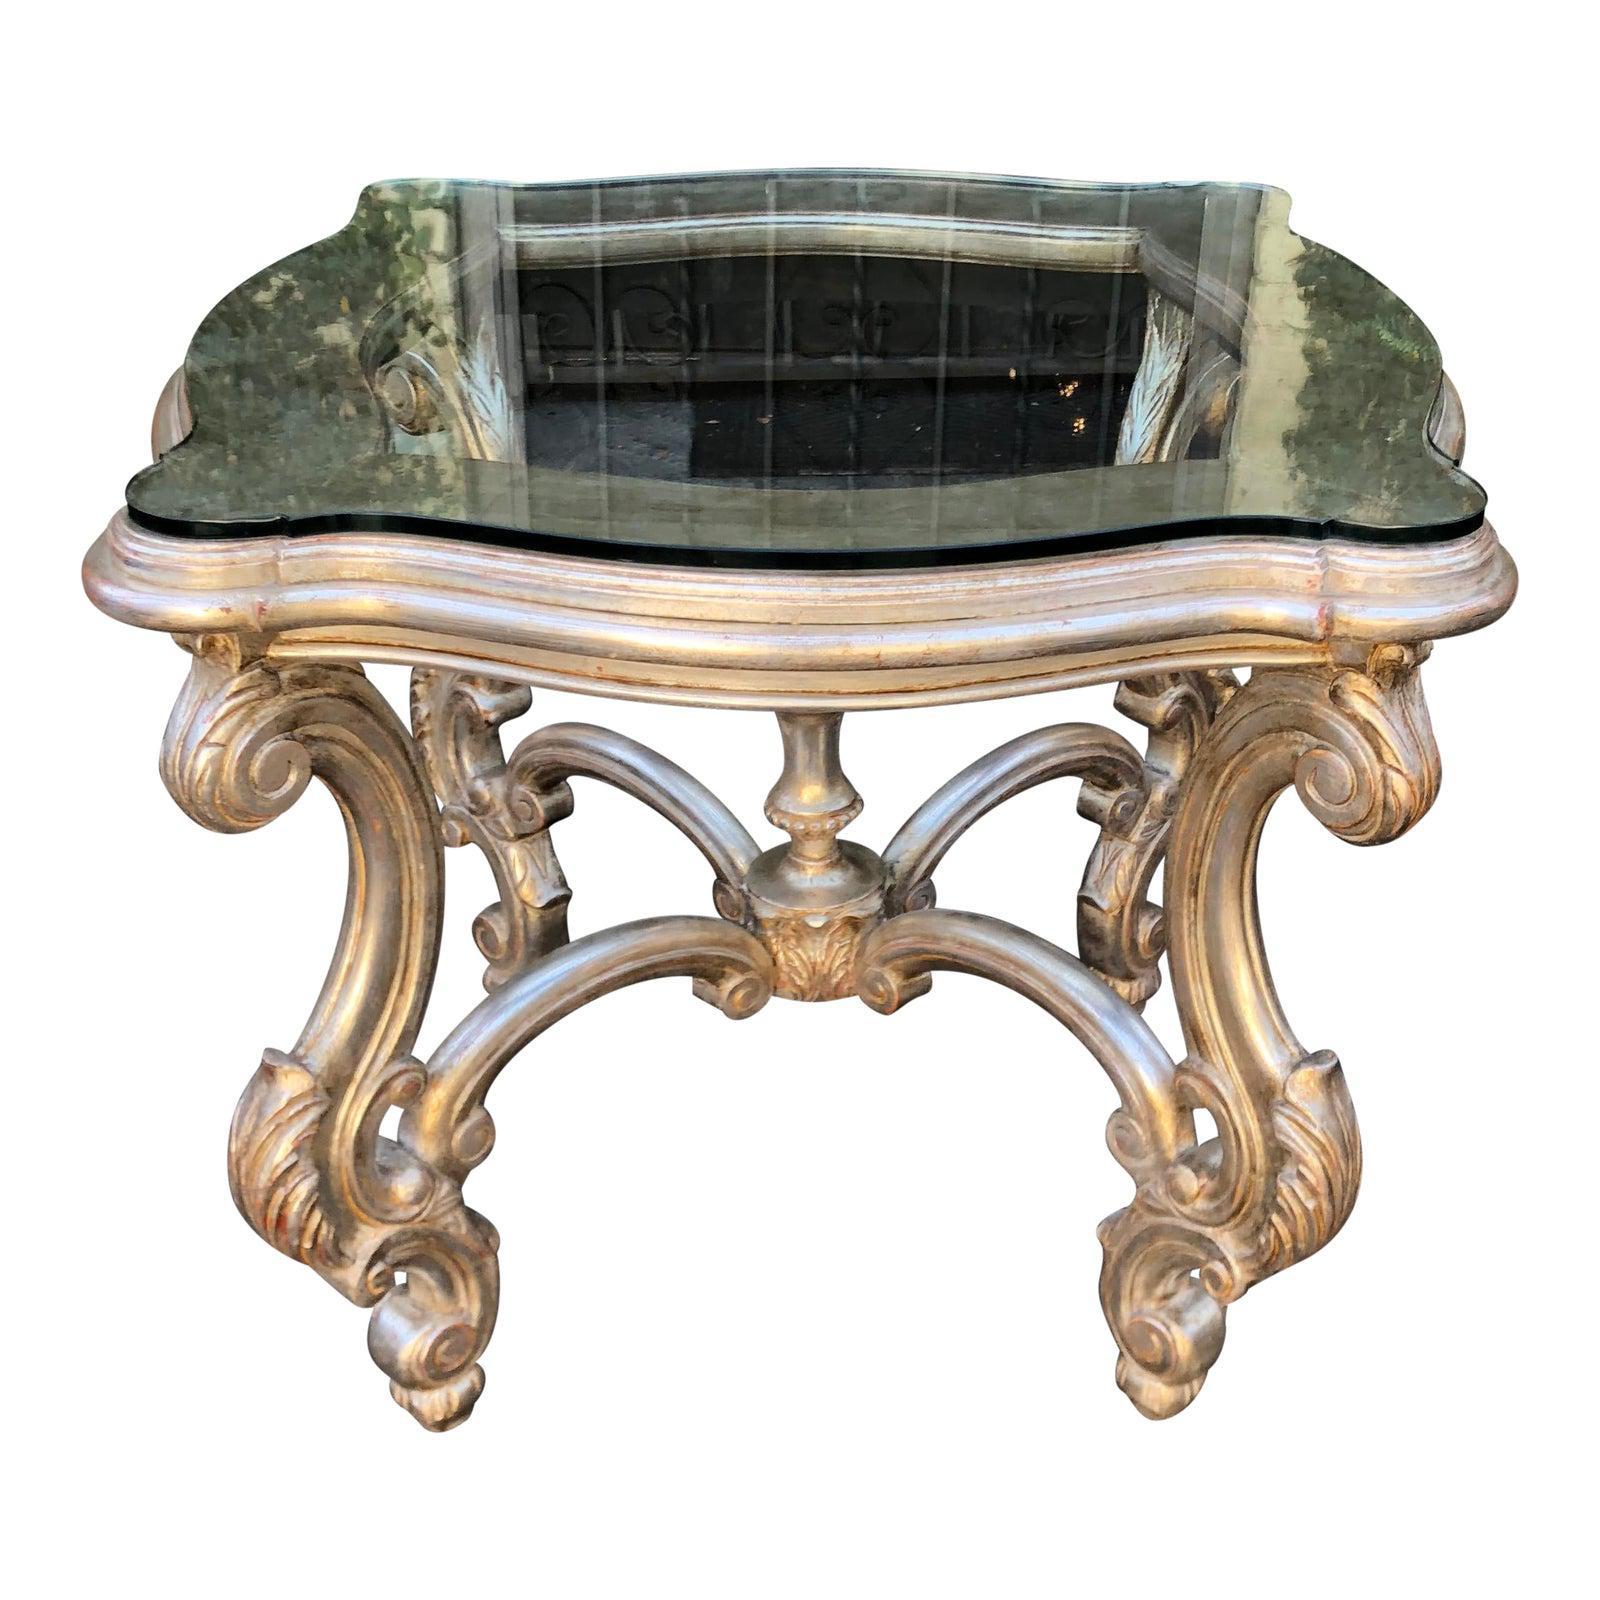 Louis XV Style Silver Giltwood designer center or side table - Valencia Spain

Additional information:
Materials: Giltwood, Silver
Color: Silver
Period: Mid 20th Century
Place of Origin: Spain
Styles: Baroque, Italian
Table Shape: Other